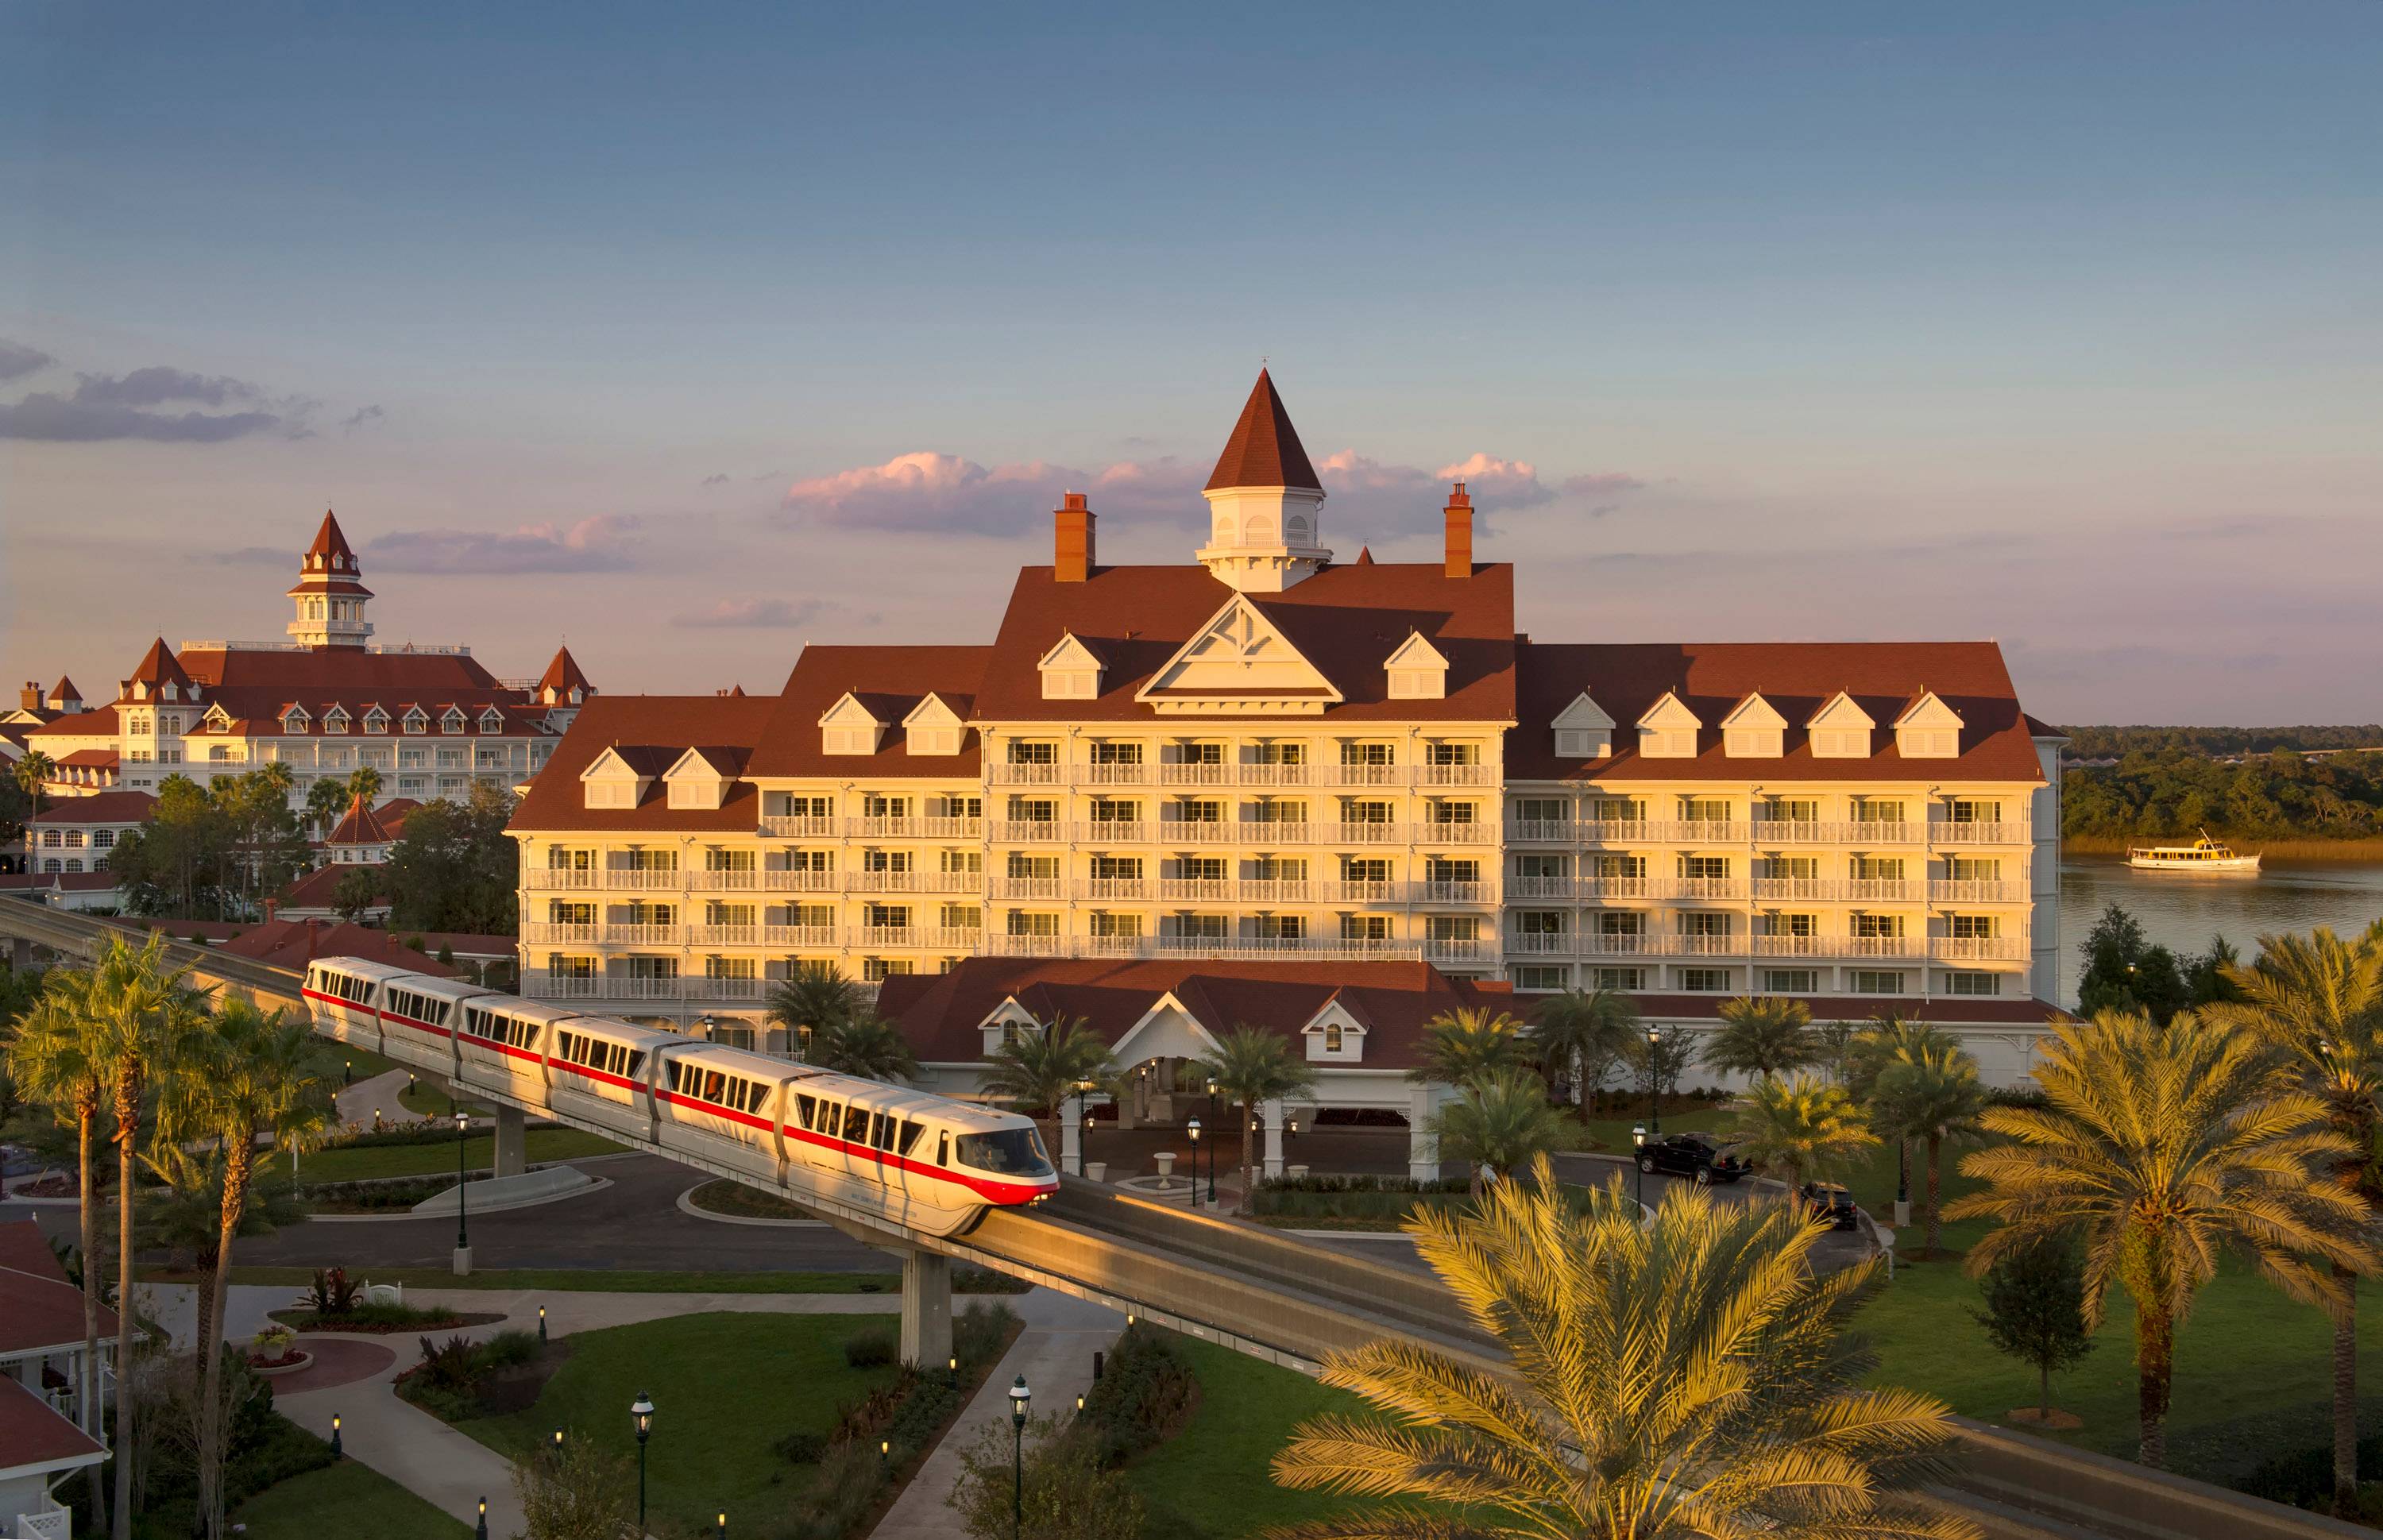 Grab and Go breakfast now available at The Villas at Disney's Grand Floridan Resort